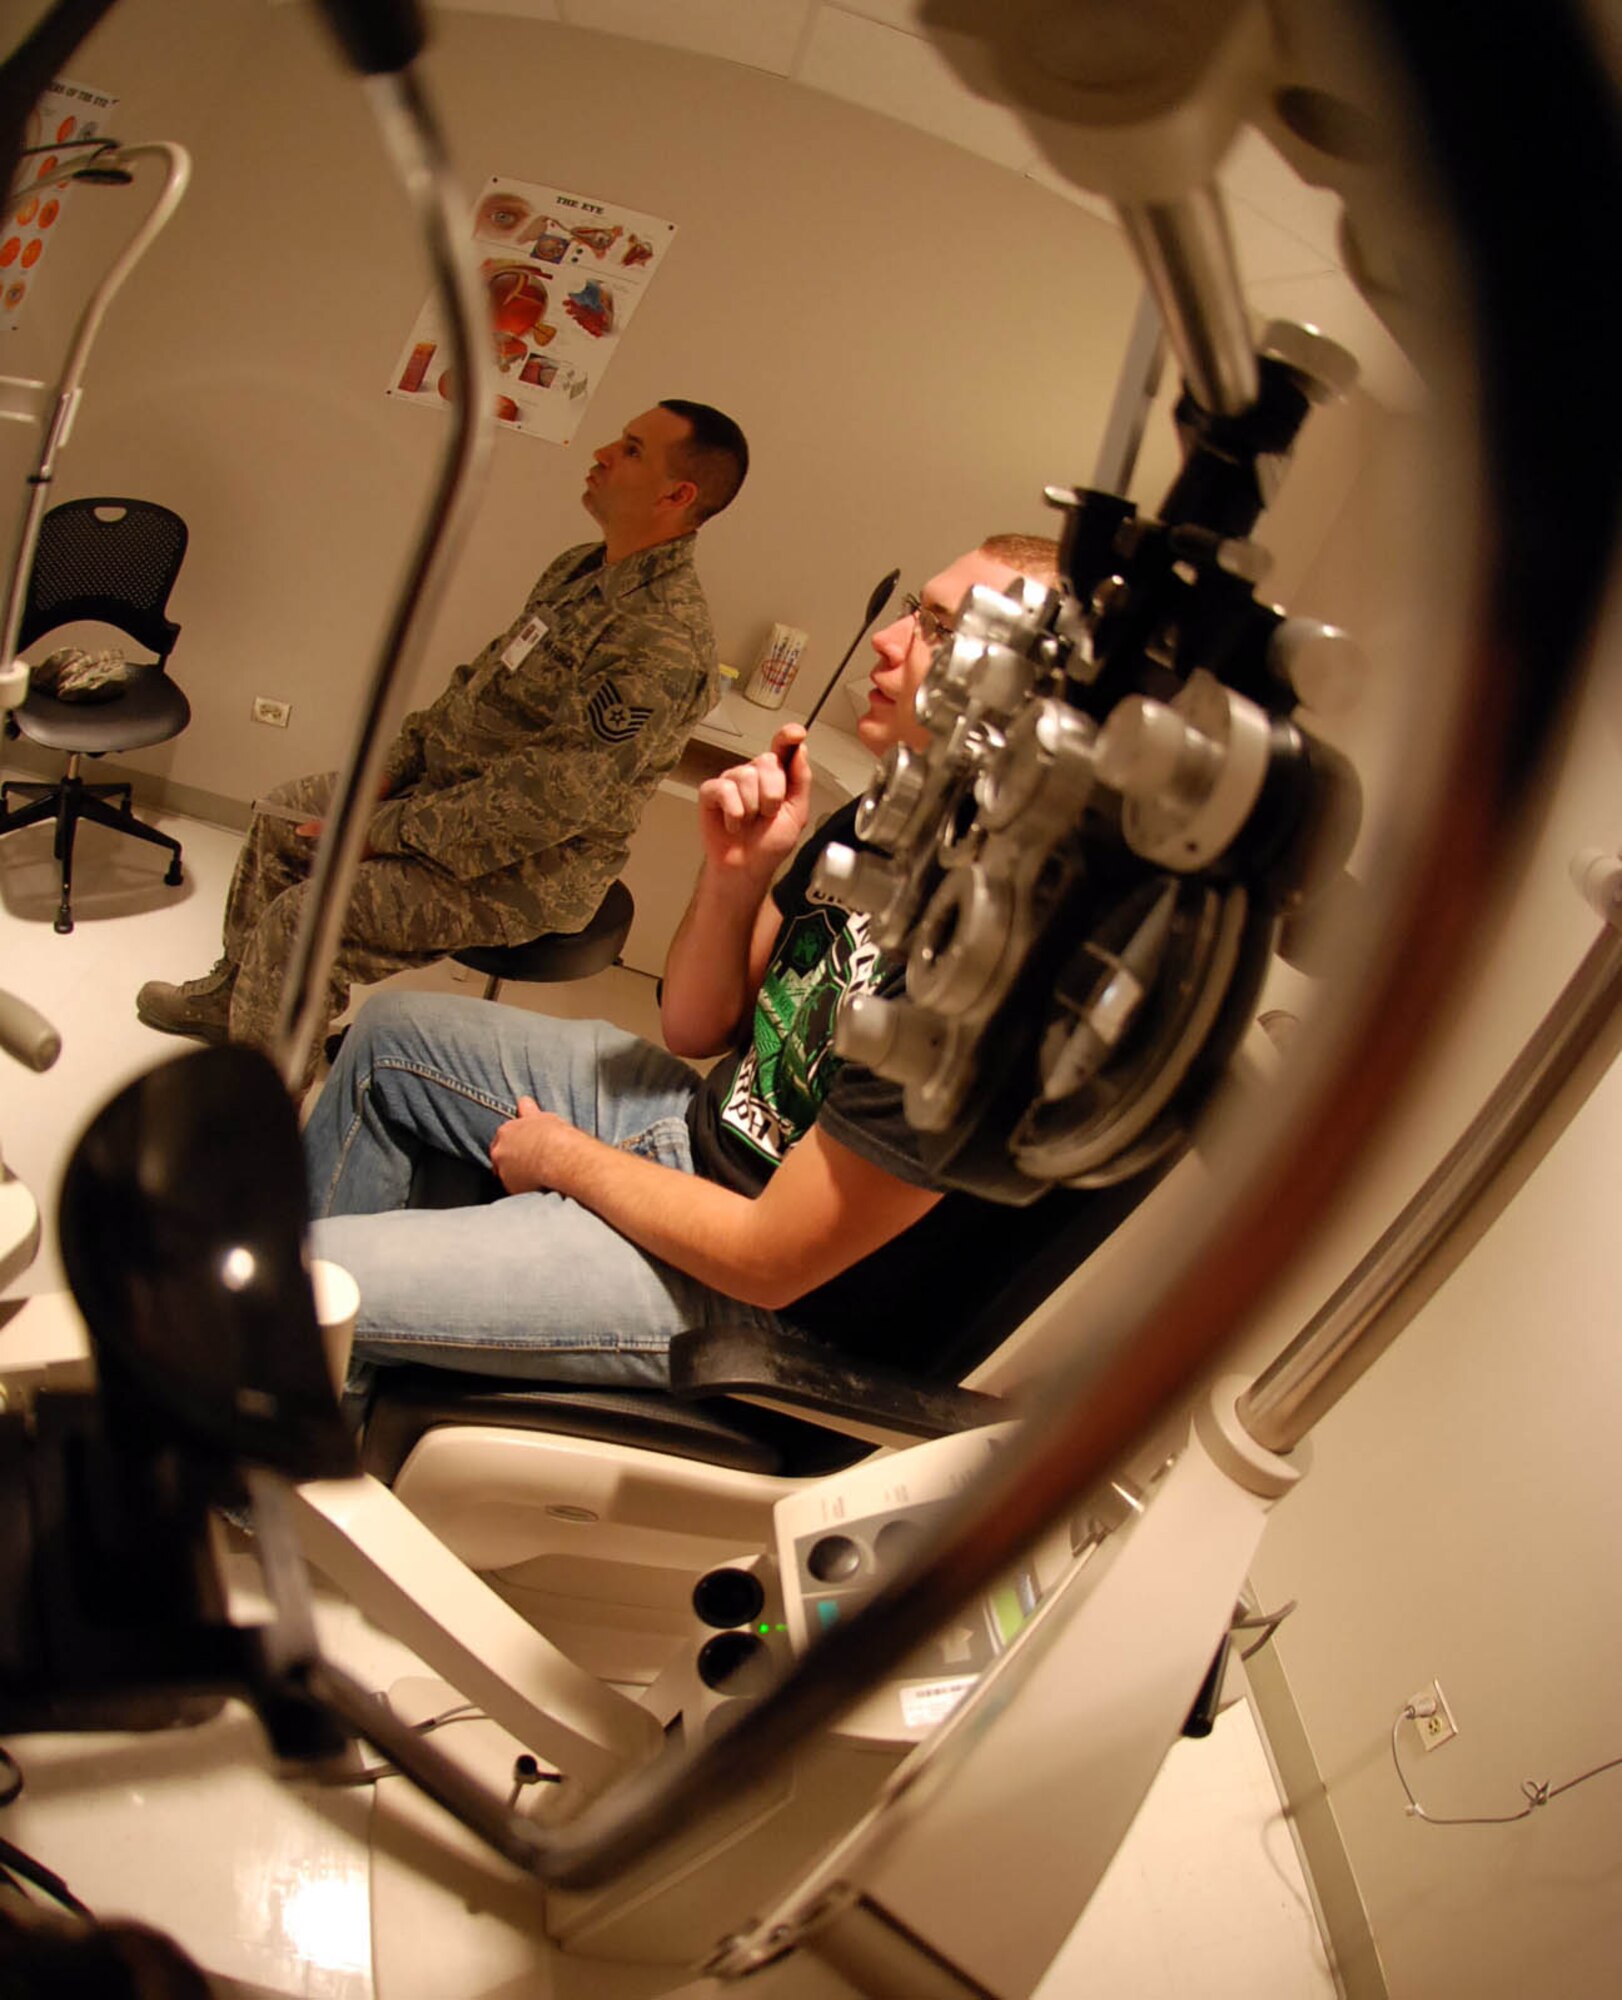 LAUGHLIN AIR FORCE BASE, Texas – Tech Sgt. Thomas Lawson, 47th Medical Operations Squadron optometry technician , conducts an eye exam on Airman 1st Class Ryan Vandewynkel , 47th Operations Support Squadron, in order for him to wear contacts at the base clinic Oct. 28. The optometry clinic’s mission here is to ensure Laughlin members have healthy eyes and optimal vision to accomplish their duties. (U.S. Air Force photo by Airman 1st Class Sara Csurilla)